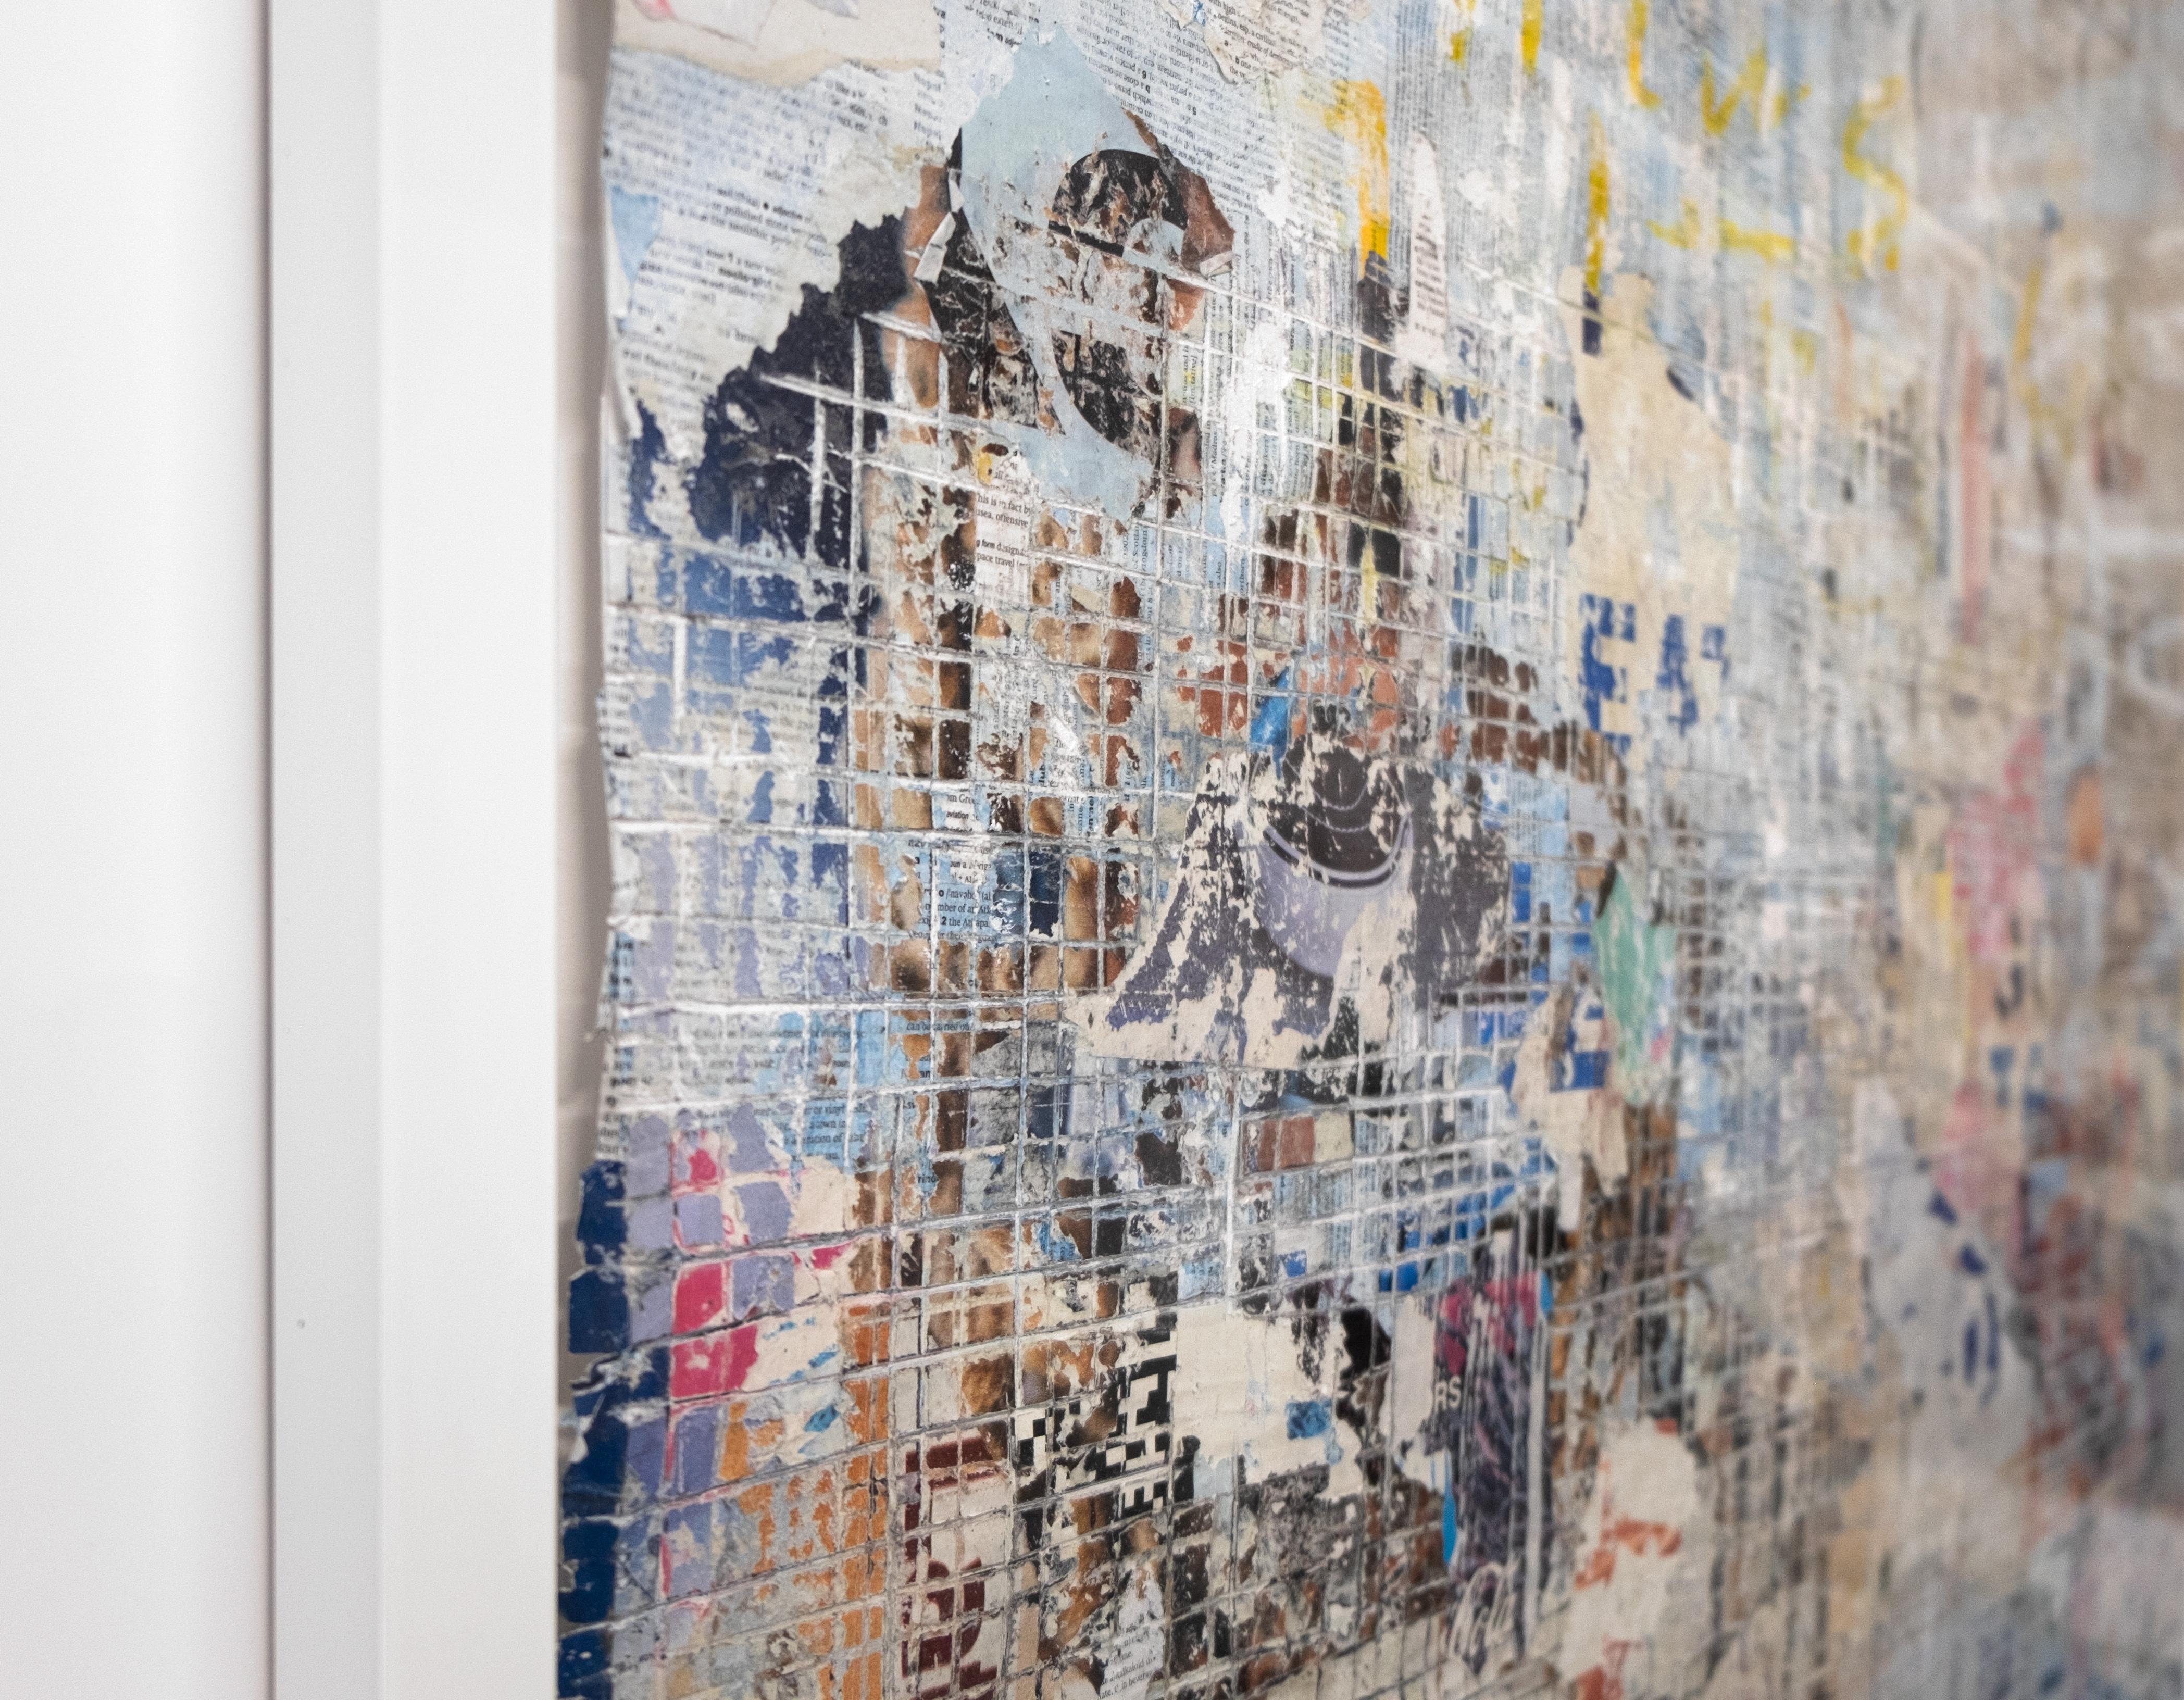 David Fredrik Moussallem’s mixed-media abstract paintings tell different “stories from the streets” and respond to urban landscape.  His palette is soft, mainly using white, beige and blue that mimic the surface of peeling city walls.

Extensive